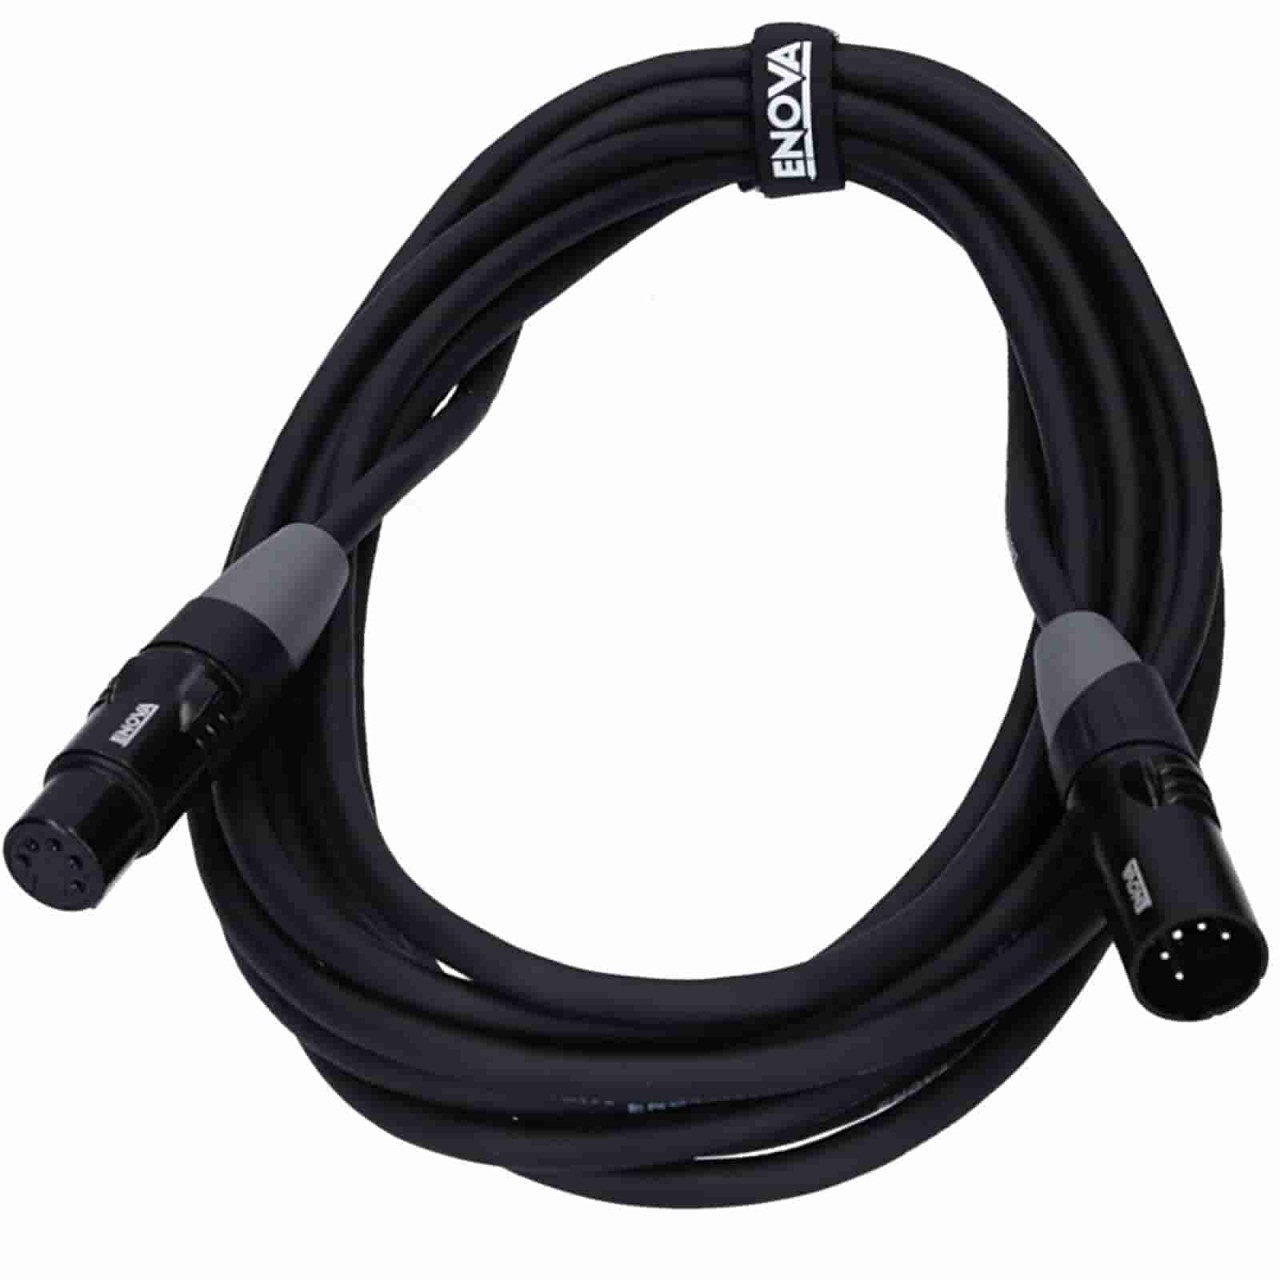 3 meter DMX cable with 5 pin XLR connector